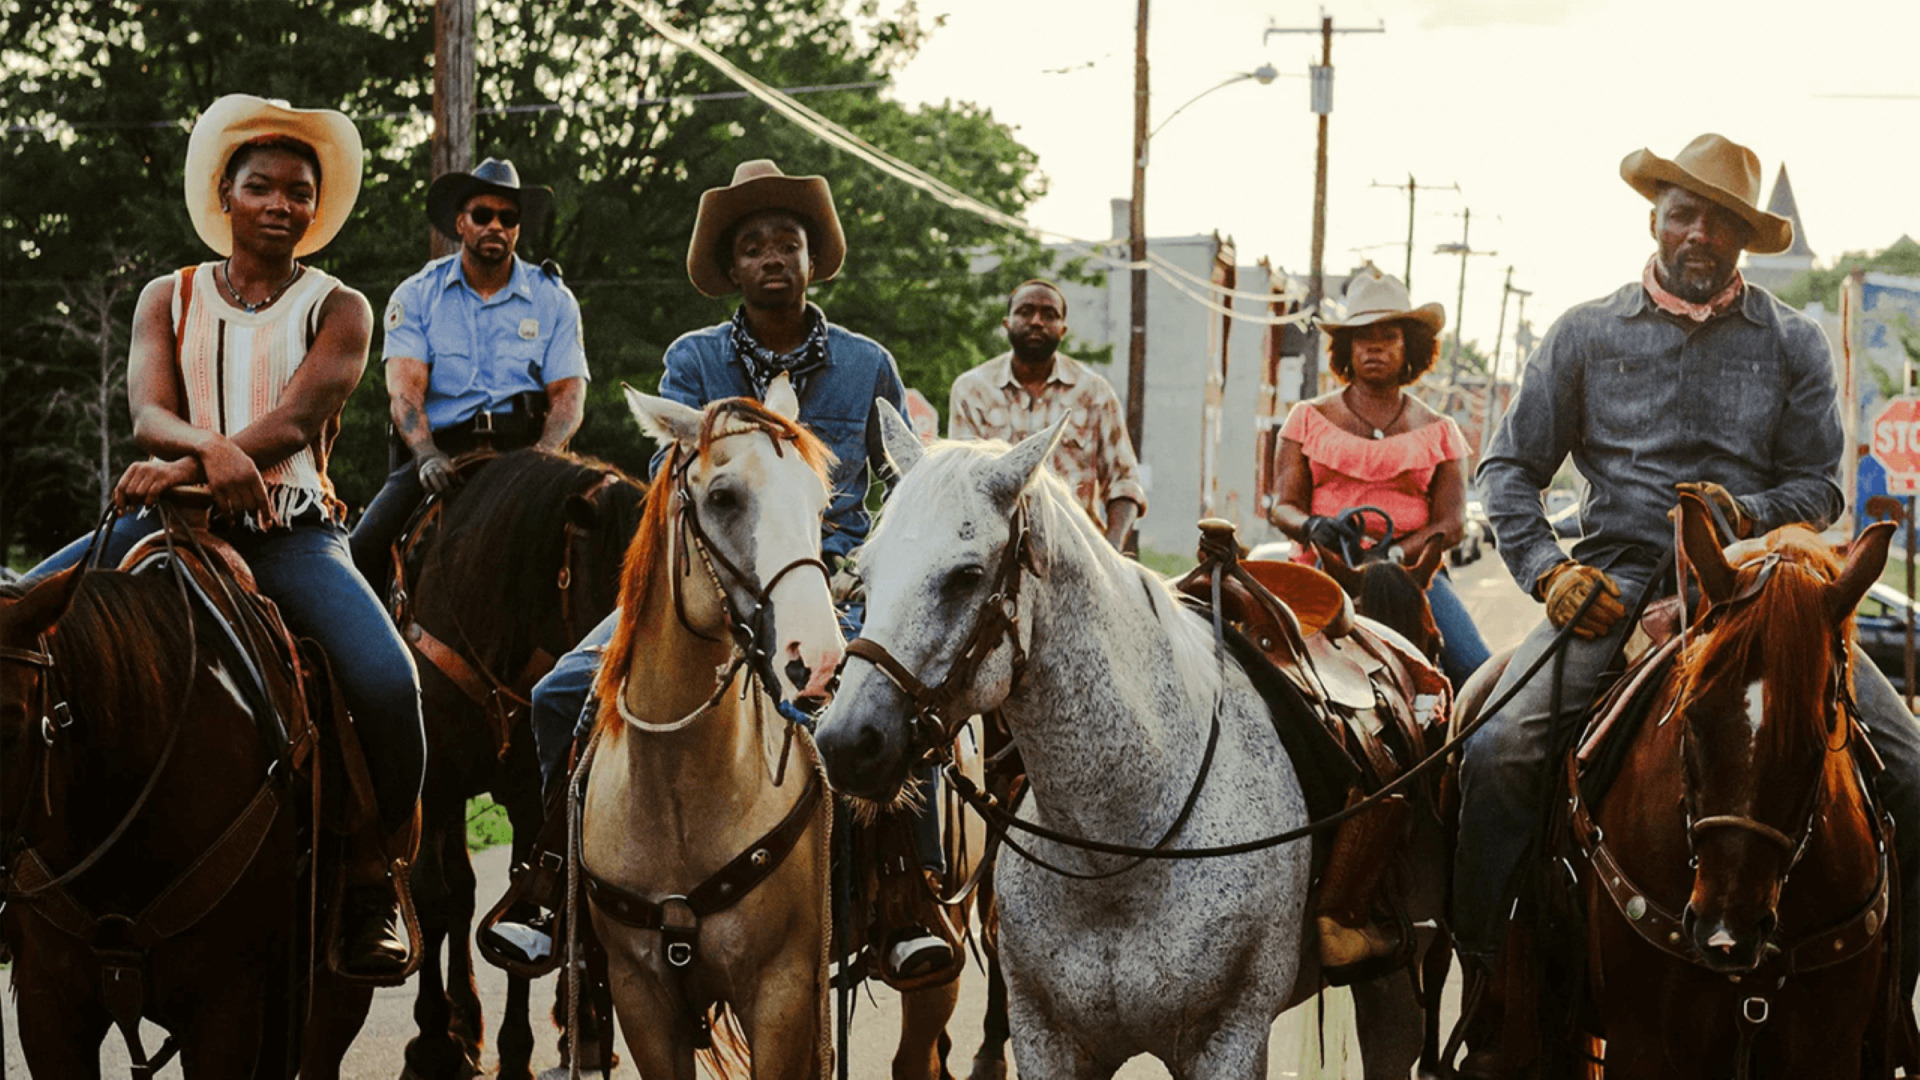 This image released by Netflix shows, from left, Ivannah-Mercedes, Lorraine Toussaint, Idris Elba, Caleb McLaughlin, Jamil "Mil" Prattis and Cliff "Method Man" Smith in a scene from "Concrete Cowboys."